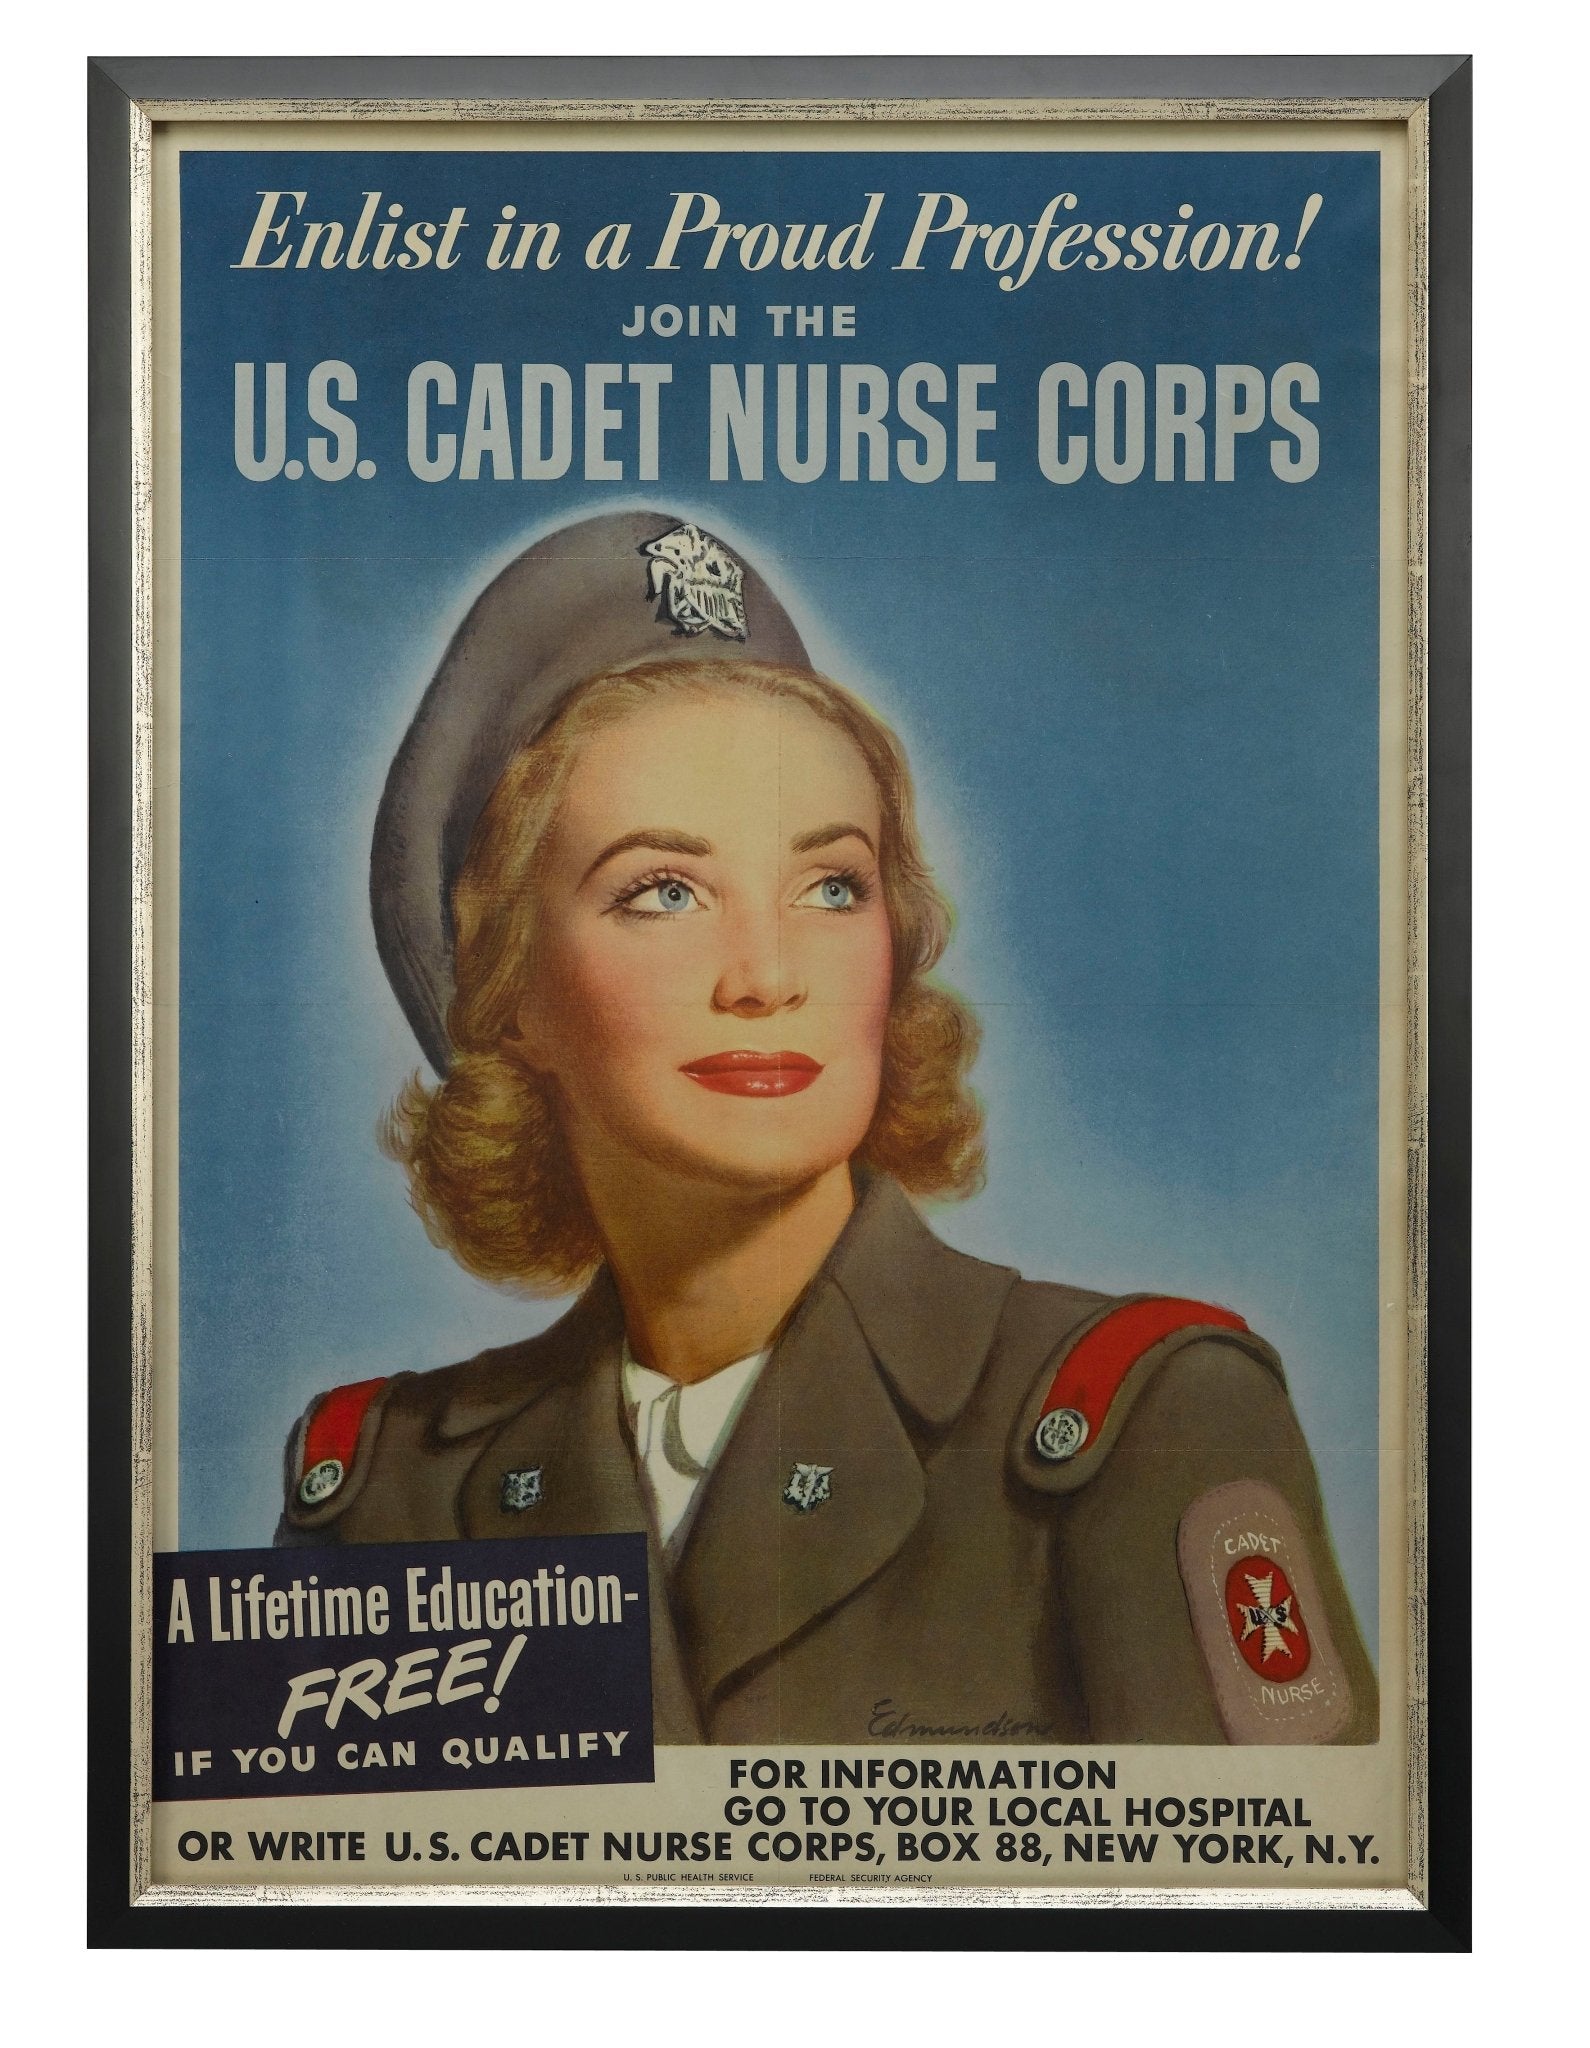 "Enlist in a Proud Profession. Join the U.S. Cadet Nurse Corps." Vintage WWII Recruitment Poster by Carolyn Edmundson - The Great Republic